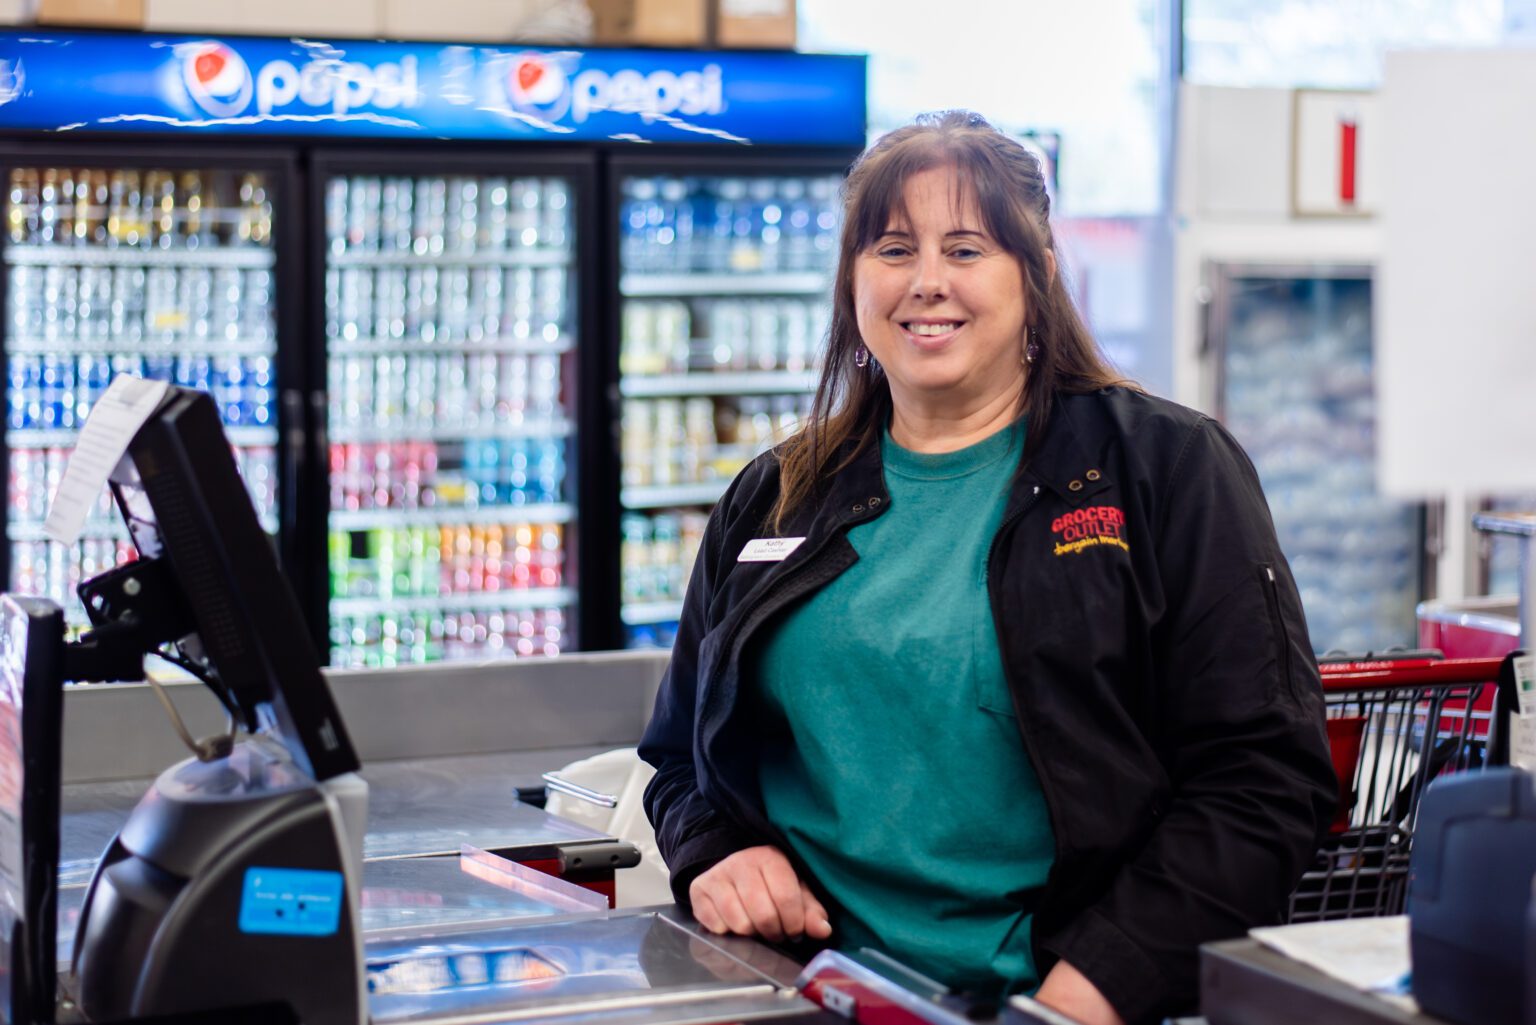 Kathy Dotinga is the lead cashier at Bellingham Grocery Outlet